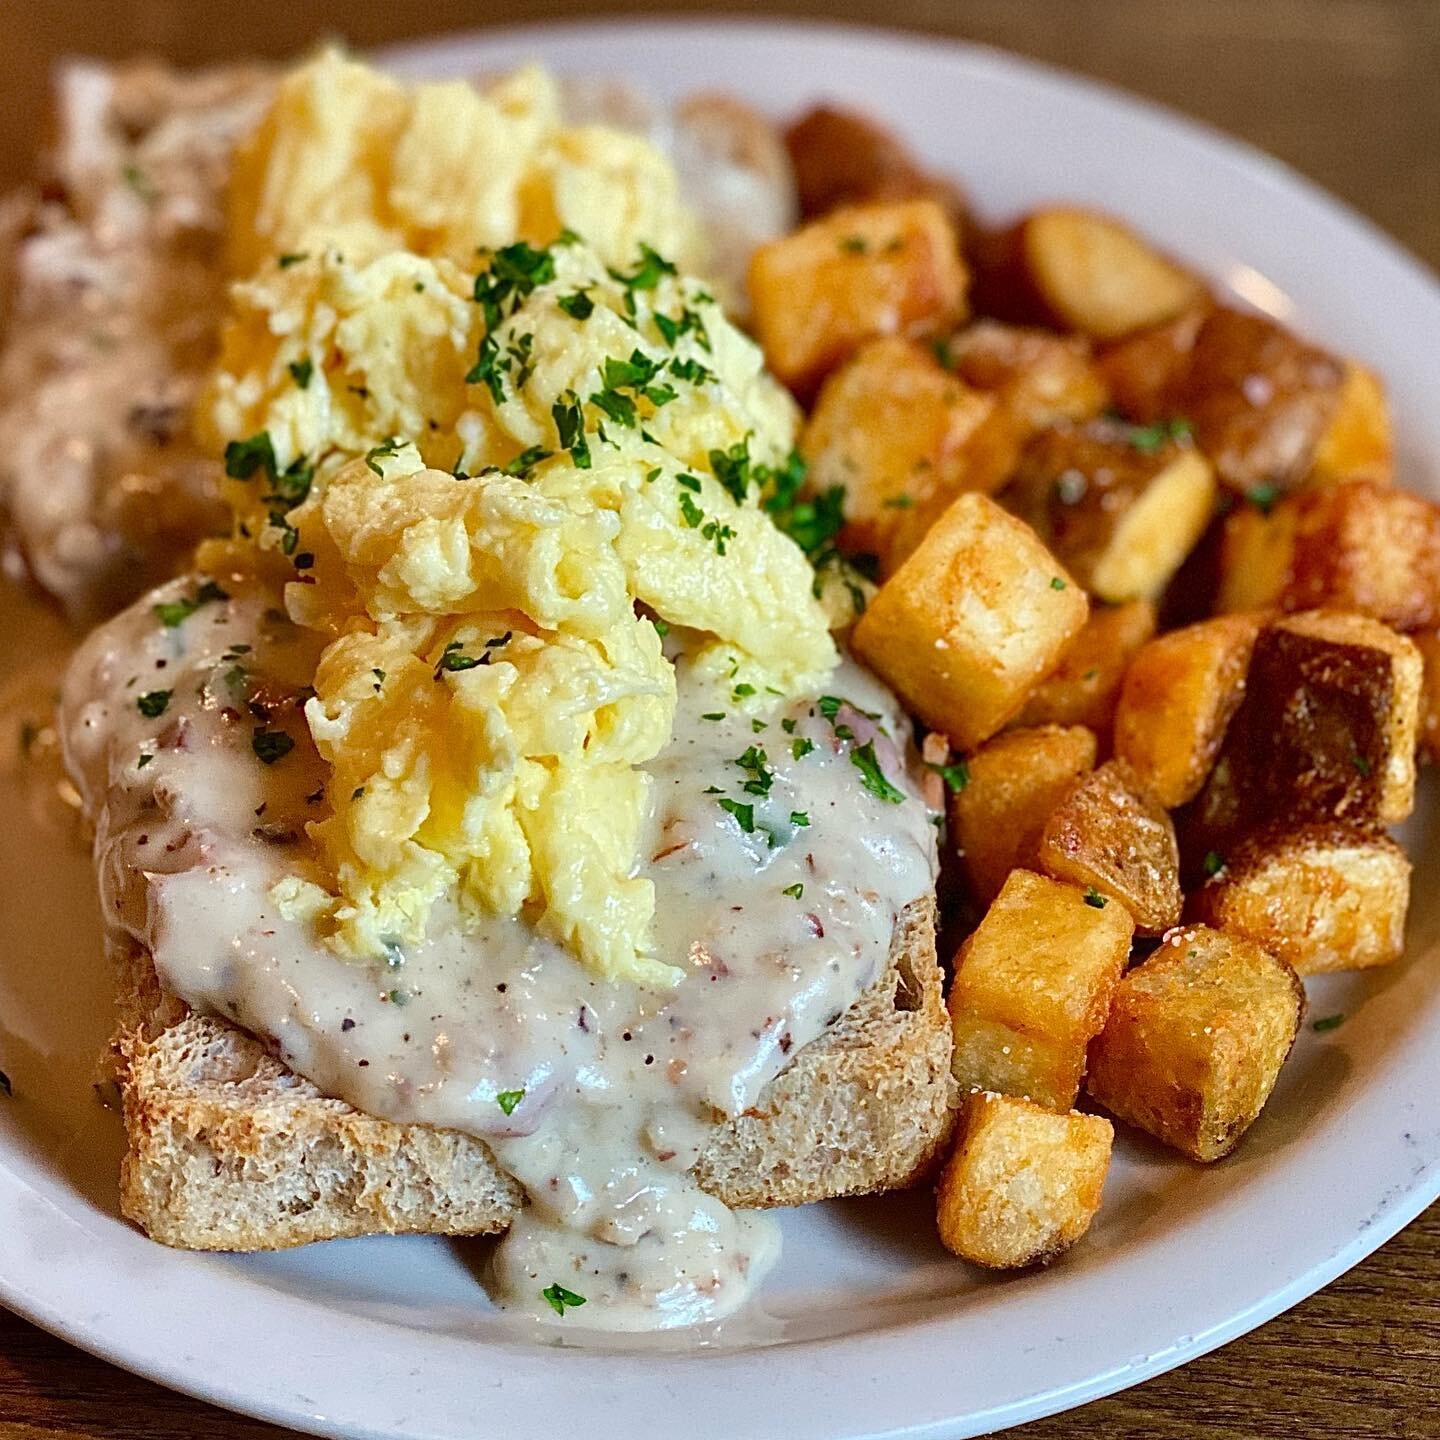 SUNDAY BRUNCH: 11am-3pm! 🥓 Full Brunch Menu available in our Highlights. Takeout Available. 🍳 215-426-2665 🧇
&bull;
&bull;
Today&rsquo;s Special: Bacon and Sausage Gravy over Rosemary Focaccia with Scrambled Eggs and Breakfast Potatoes.
#sundaybru